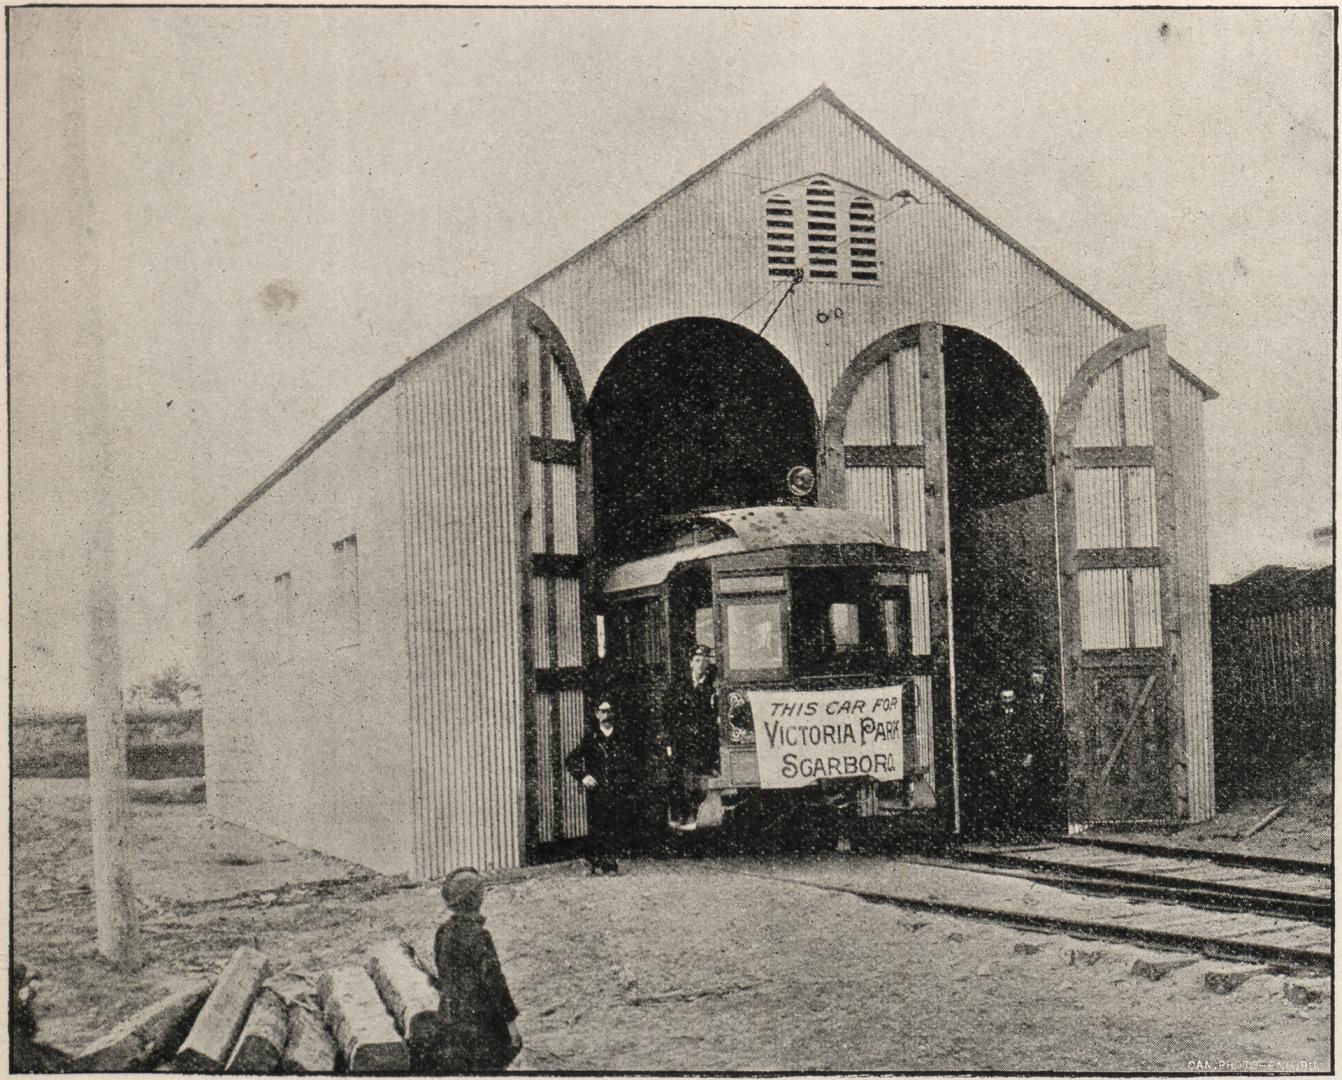 Car barn, Toronto and Scarboro' Electric Railway, Kingston Road, north side, between Walter Street and Malvern Avenue (then called Charles Street), Toronto, Ont.